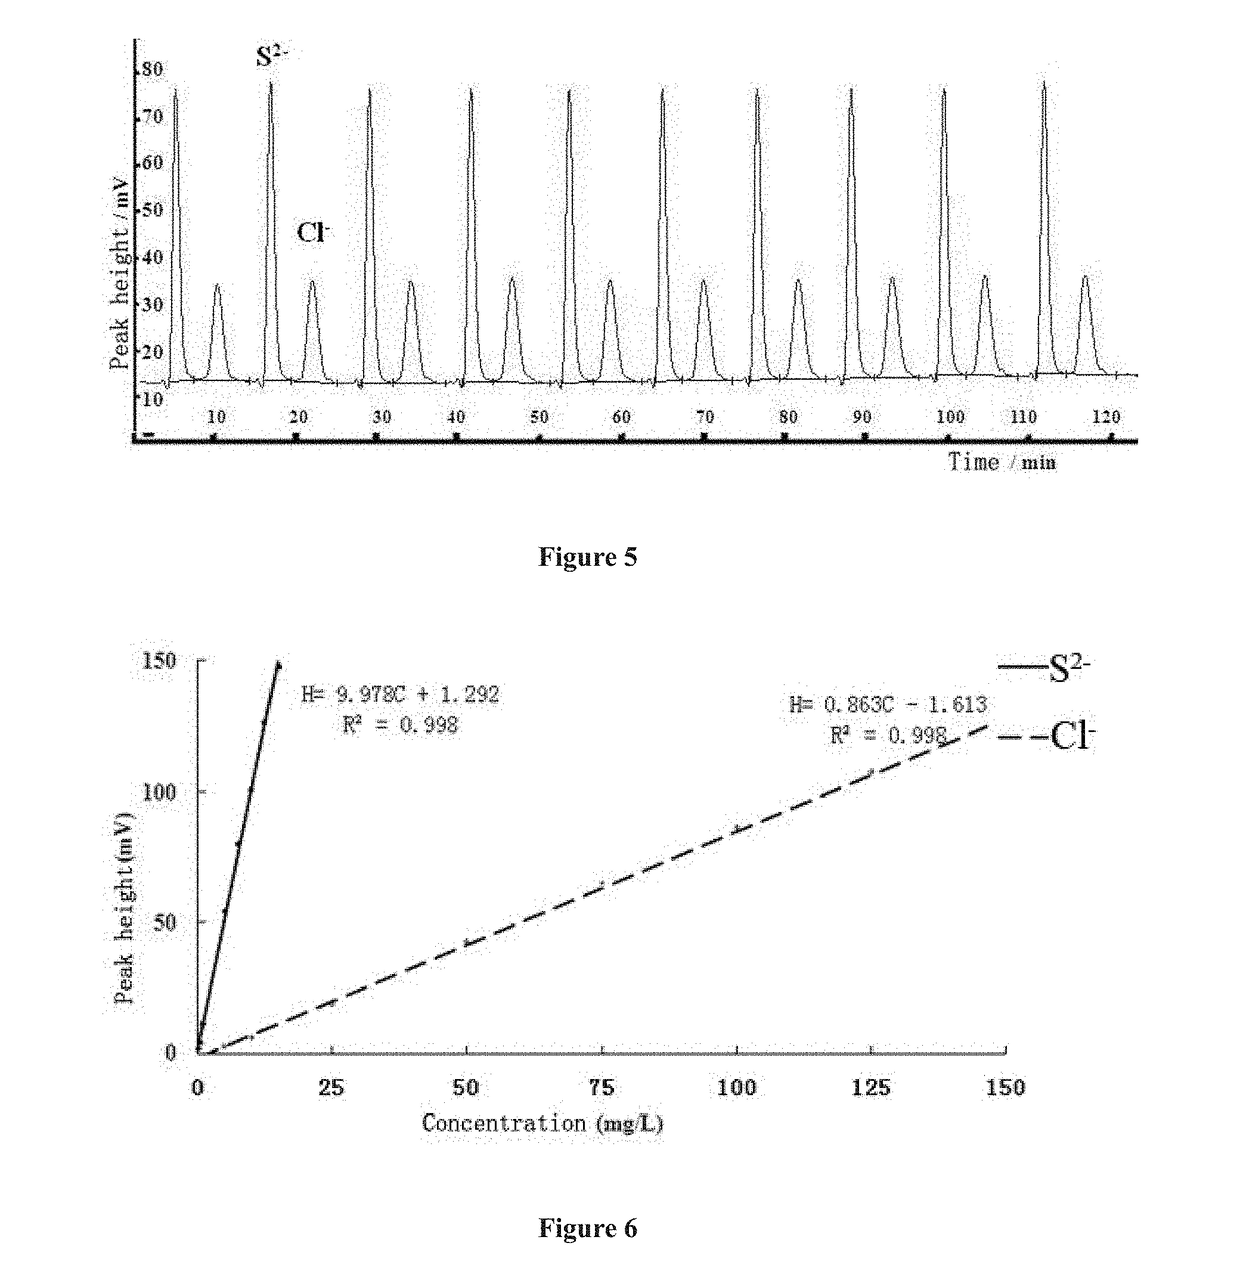 Low pressure anion exchange chromatography-turbidimetric method for simultaneous online analysis of trace sulfide and chloride in water samples